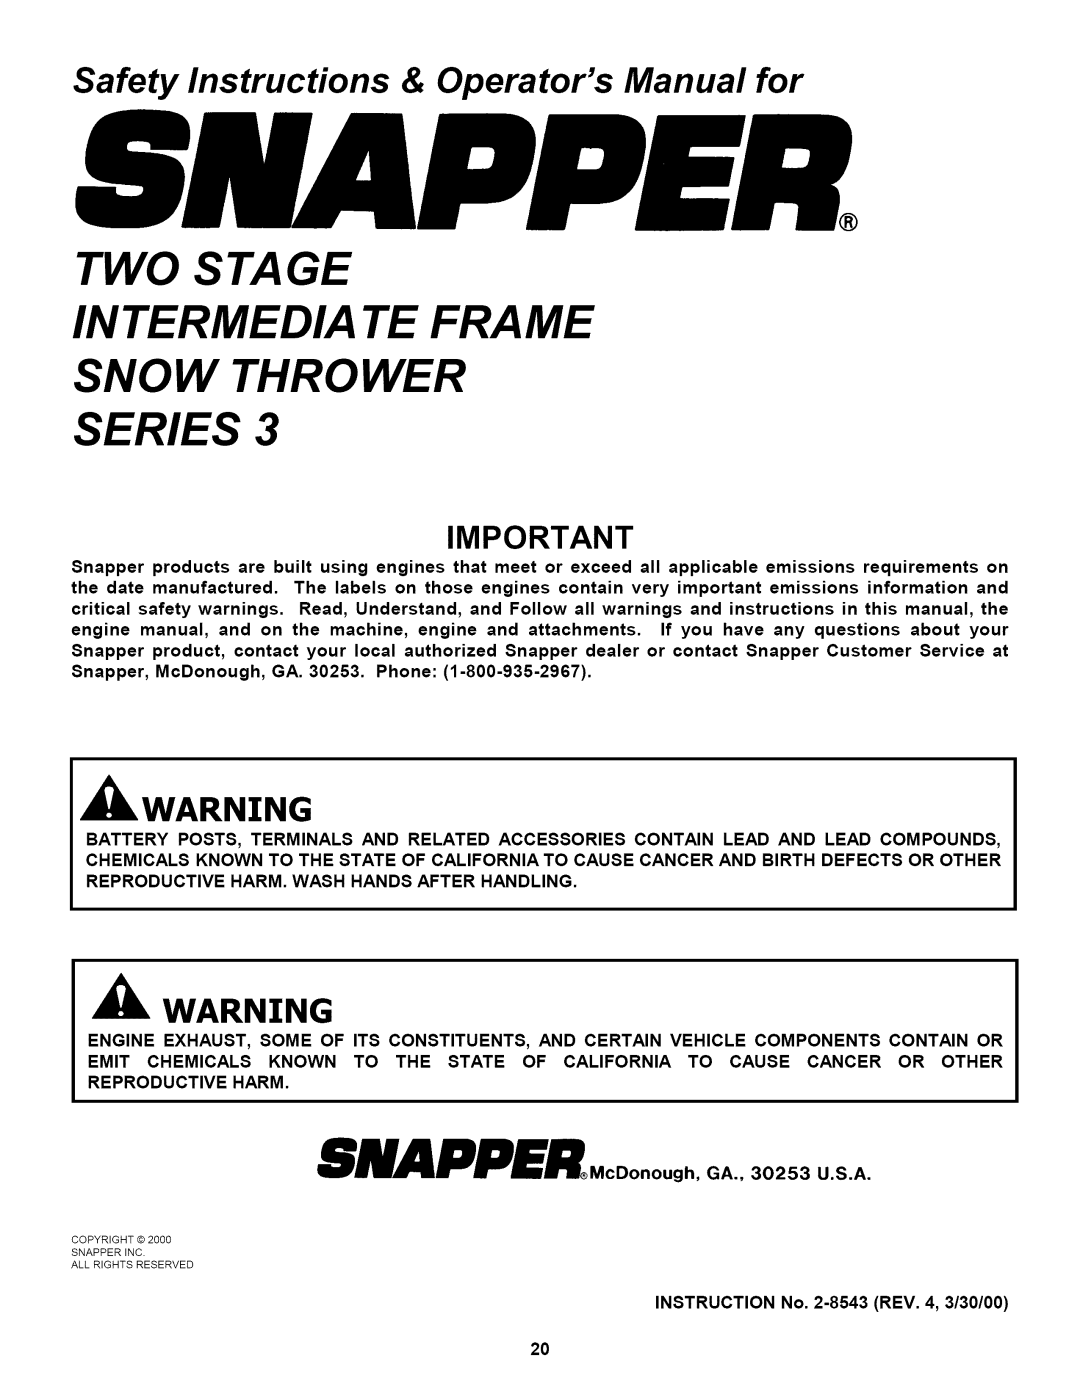 Snapper 155223 Two Stage Intermediate Frame Snow Thrower Series, Safety Instructions & Operators Manual for 